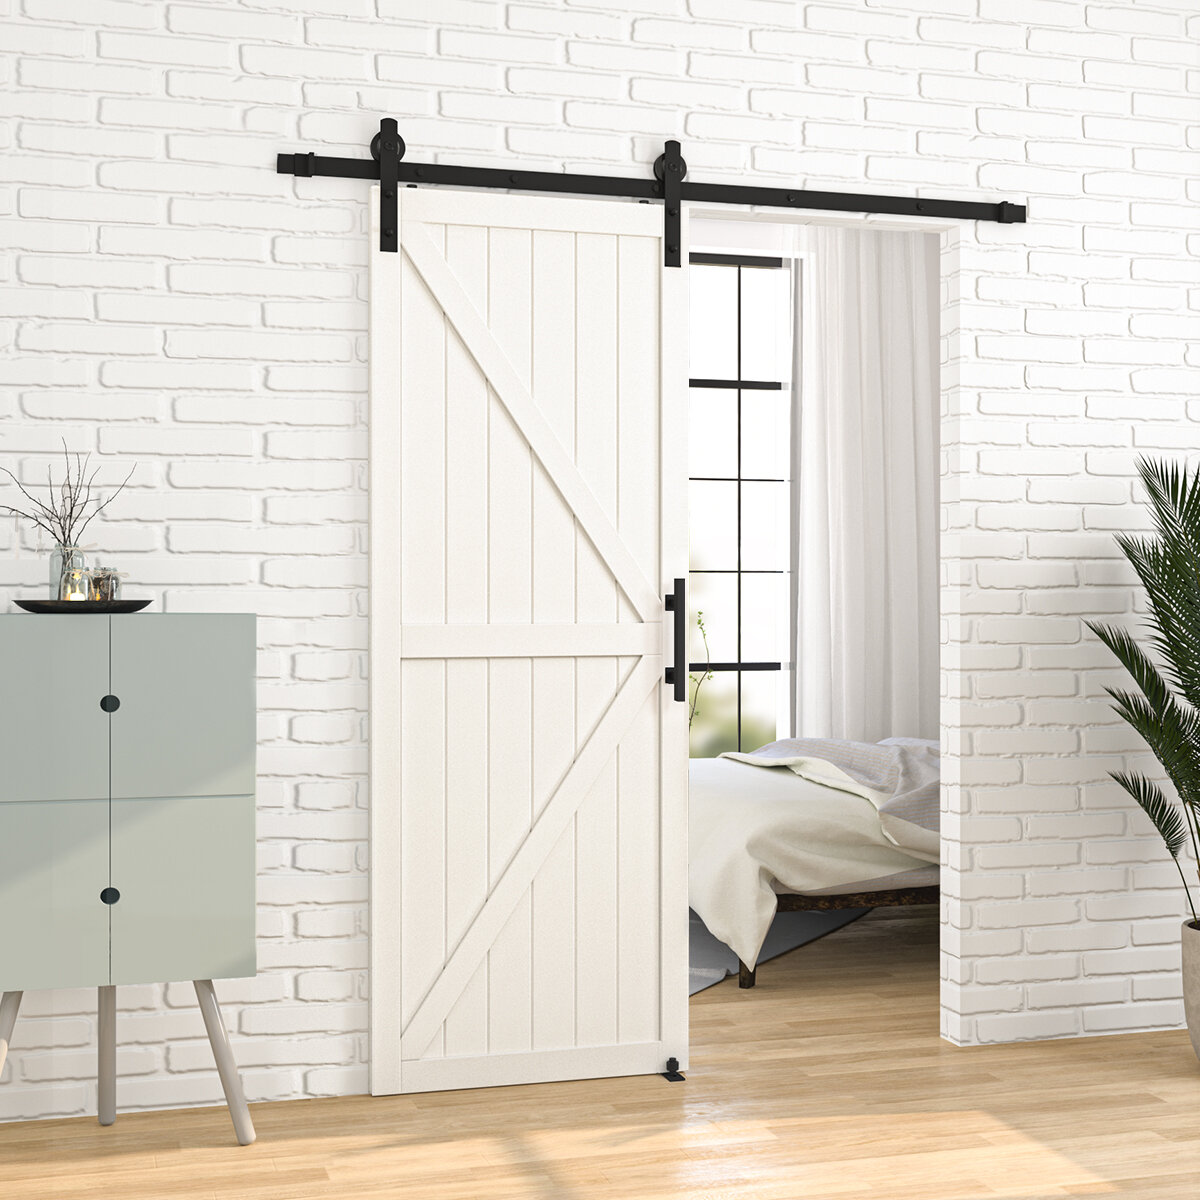 Smoothly and Quietly HomLux 5ft Double Cabinet Door Mini Barn Door Hardware Kits for Cabinet Doors Simple and Easy to Install J Shape Hangers 